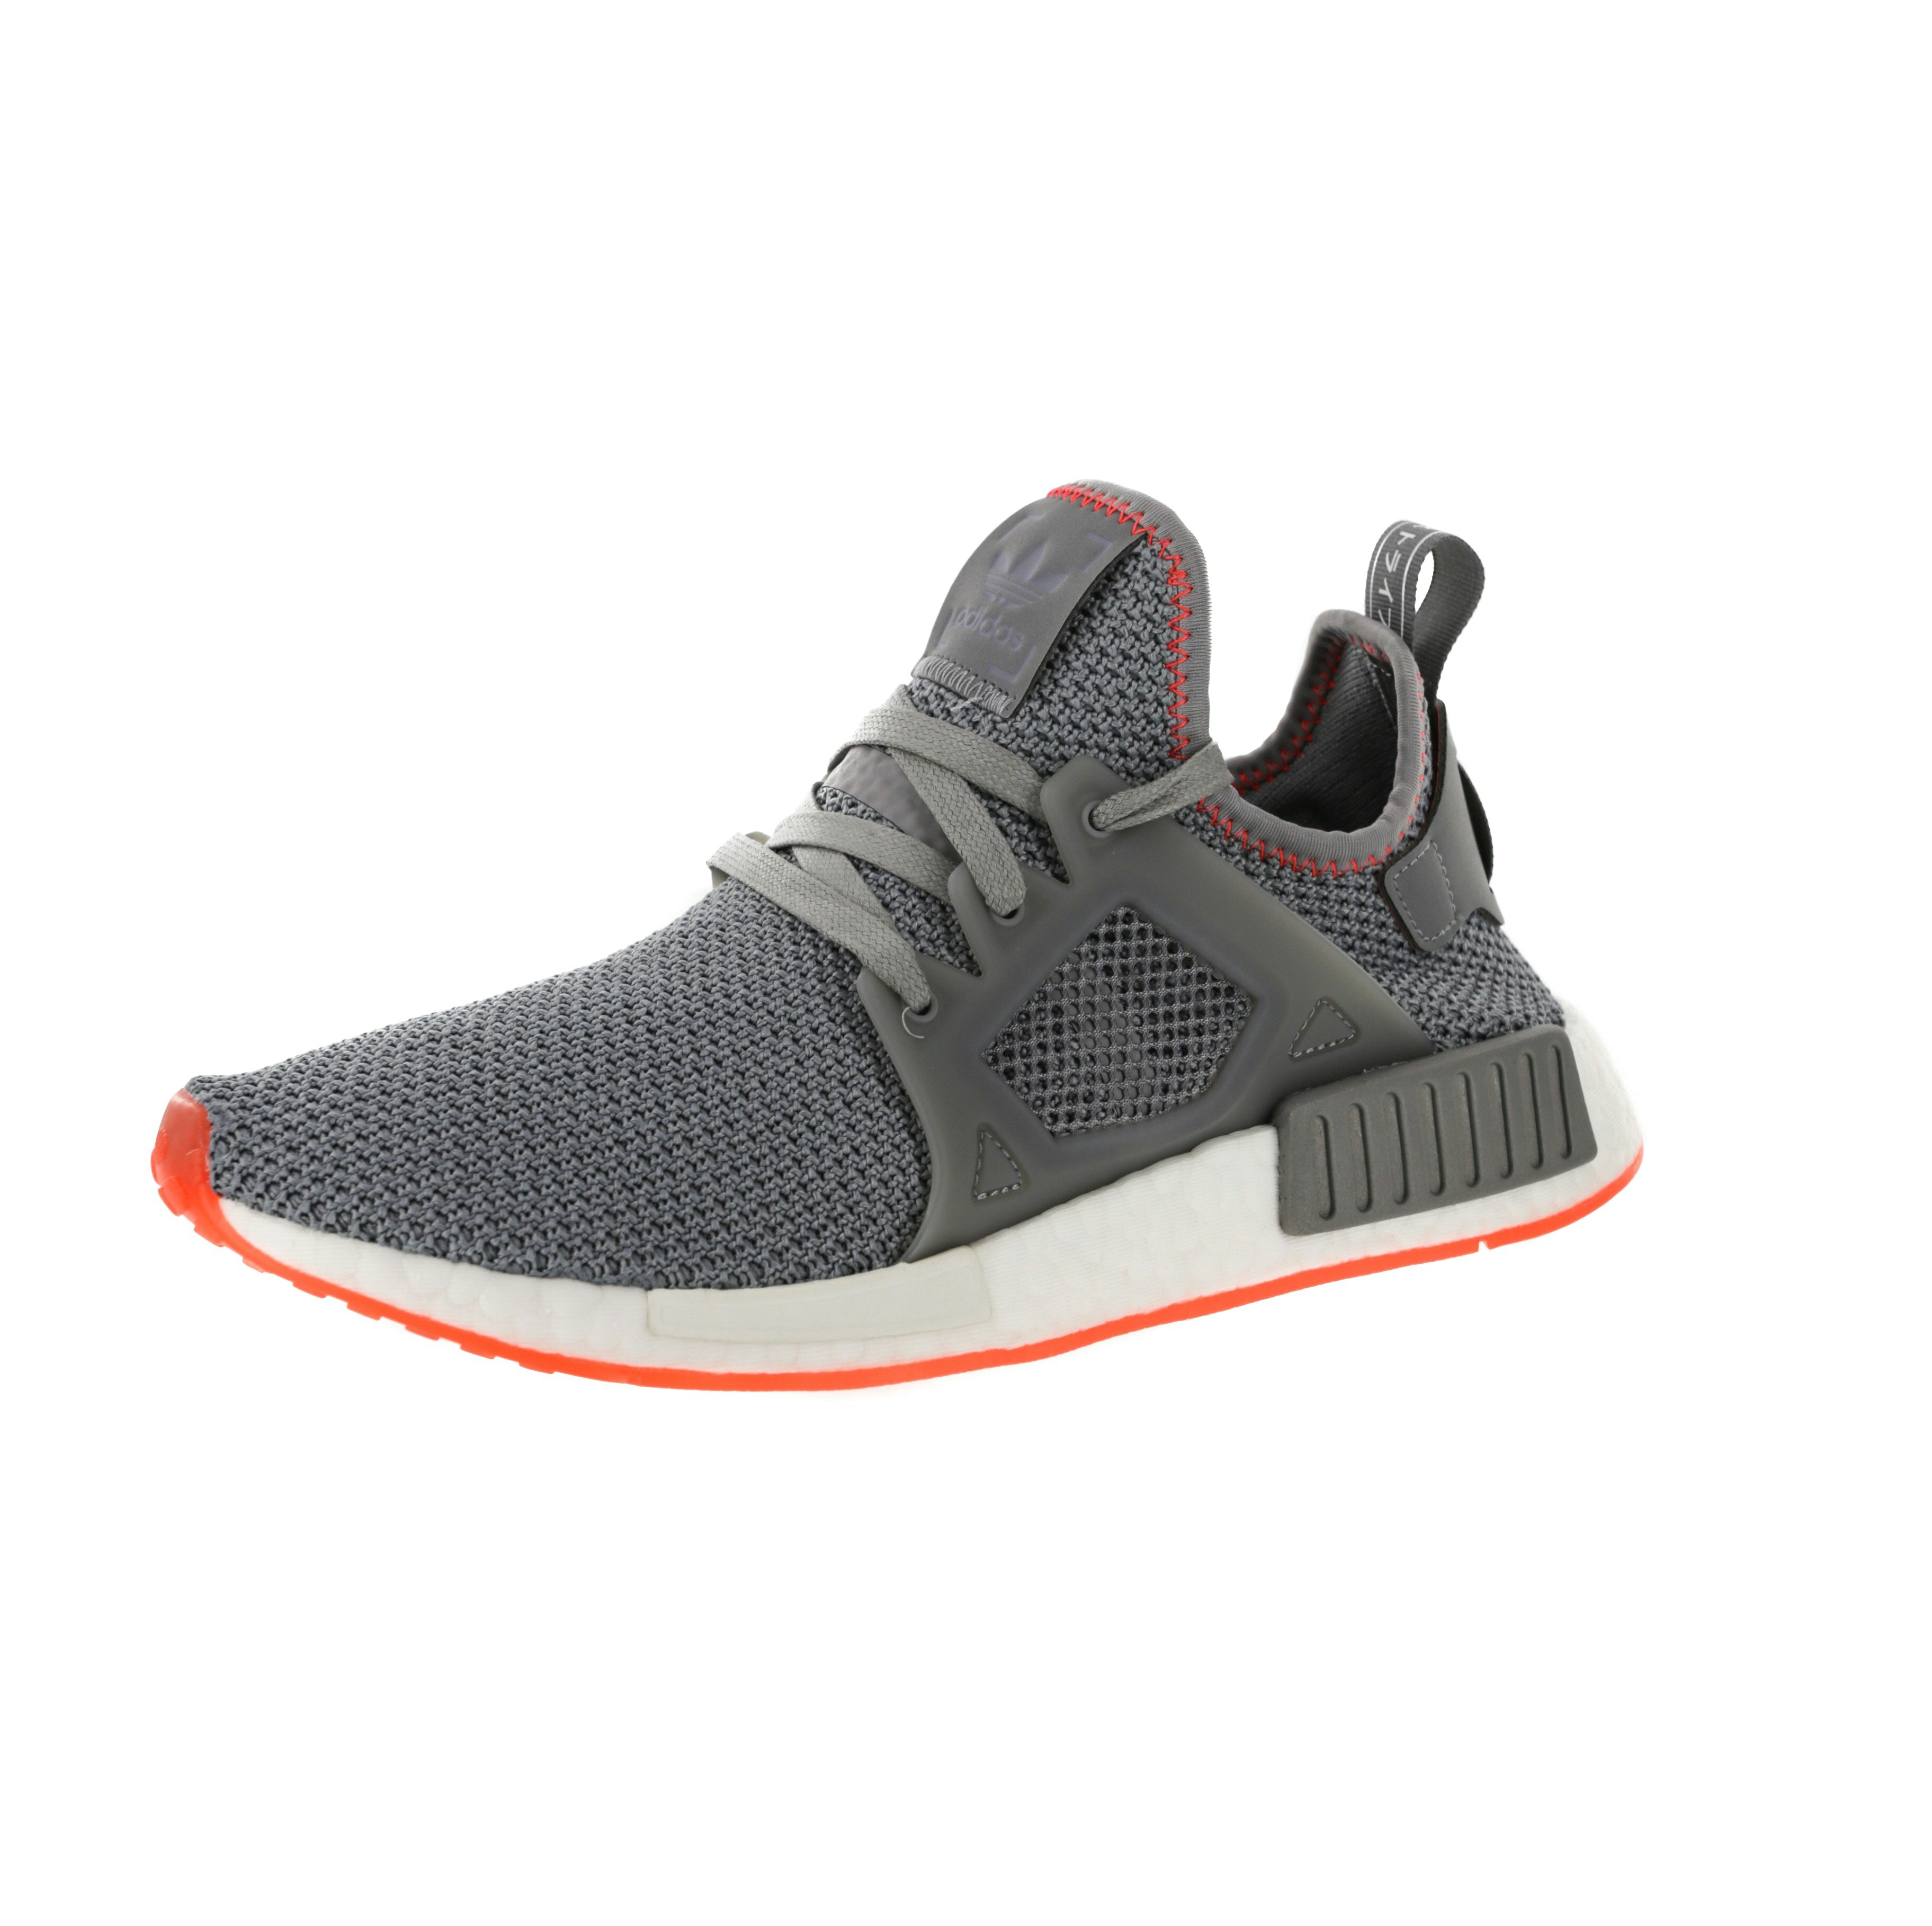 Review Adidas Nmd Xr1 Size 40 Summer Shoes For Wome.